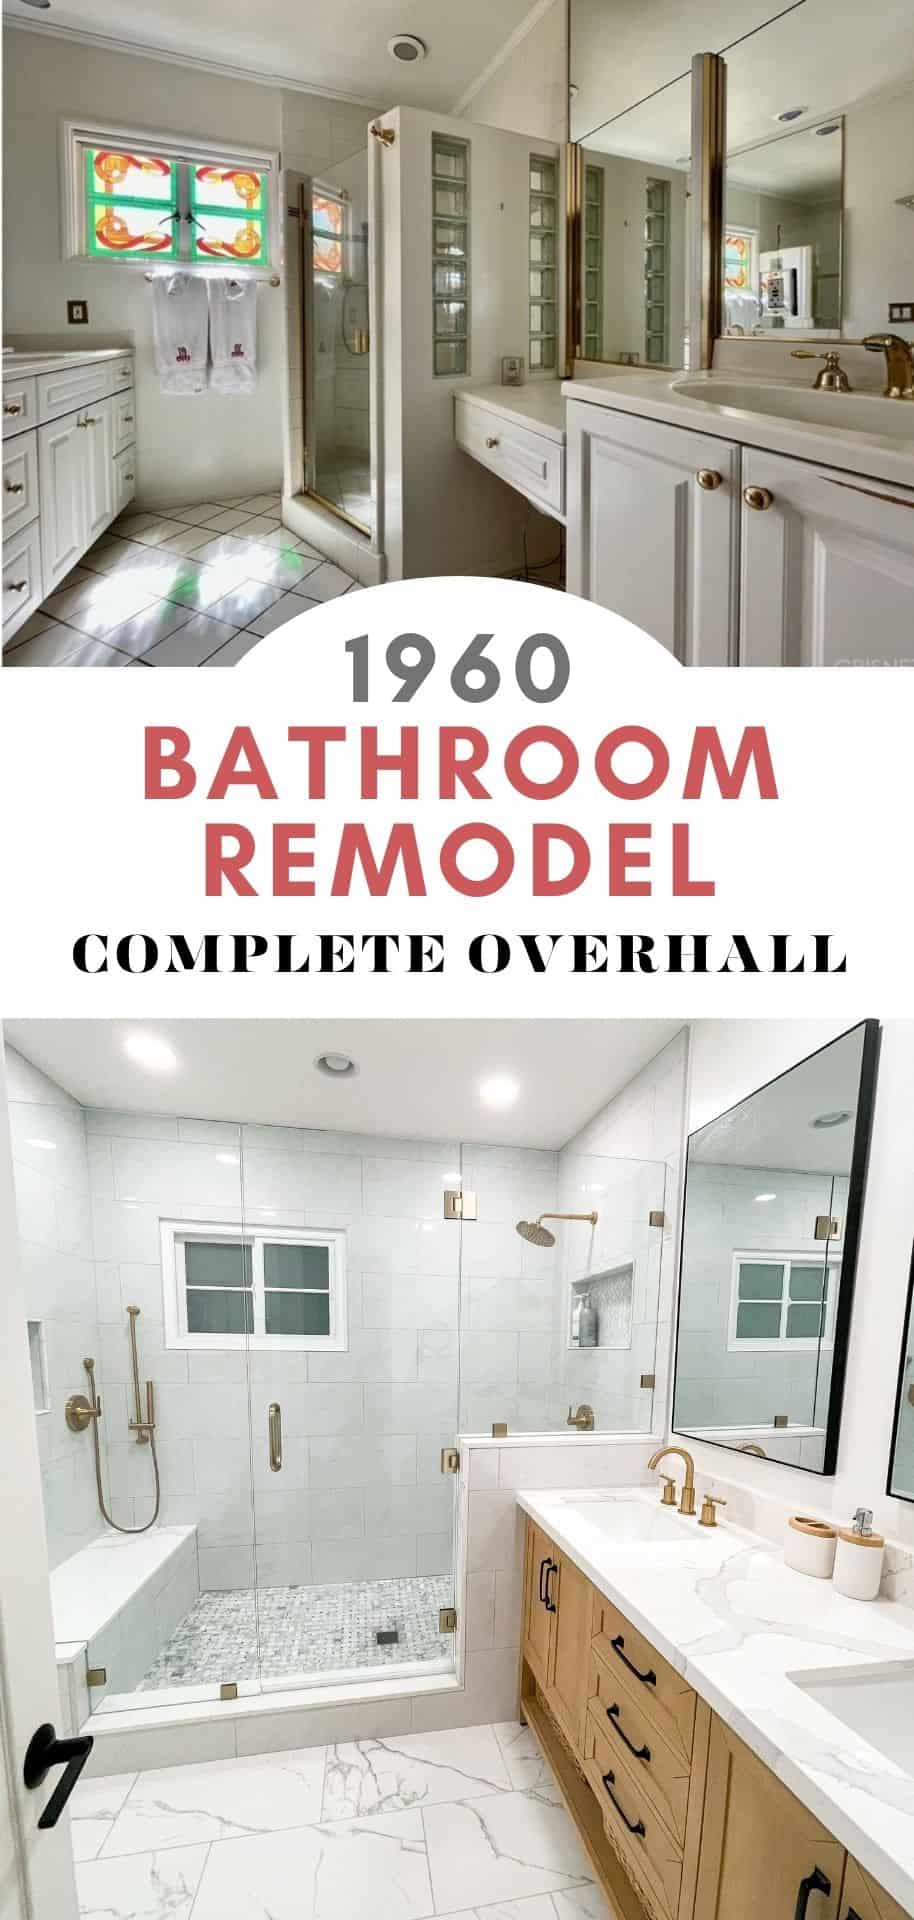 BATHROOM RENOVATION BEFORE AND AFTER